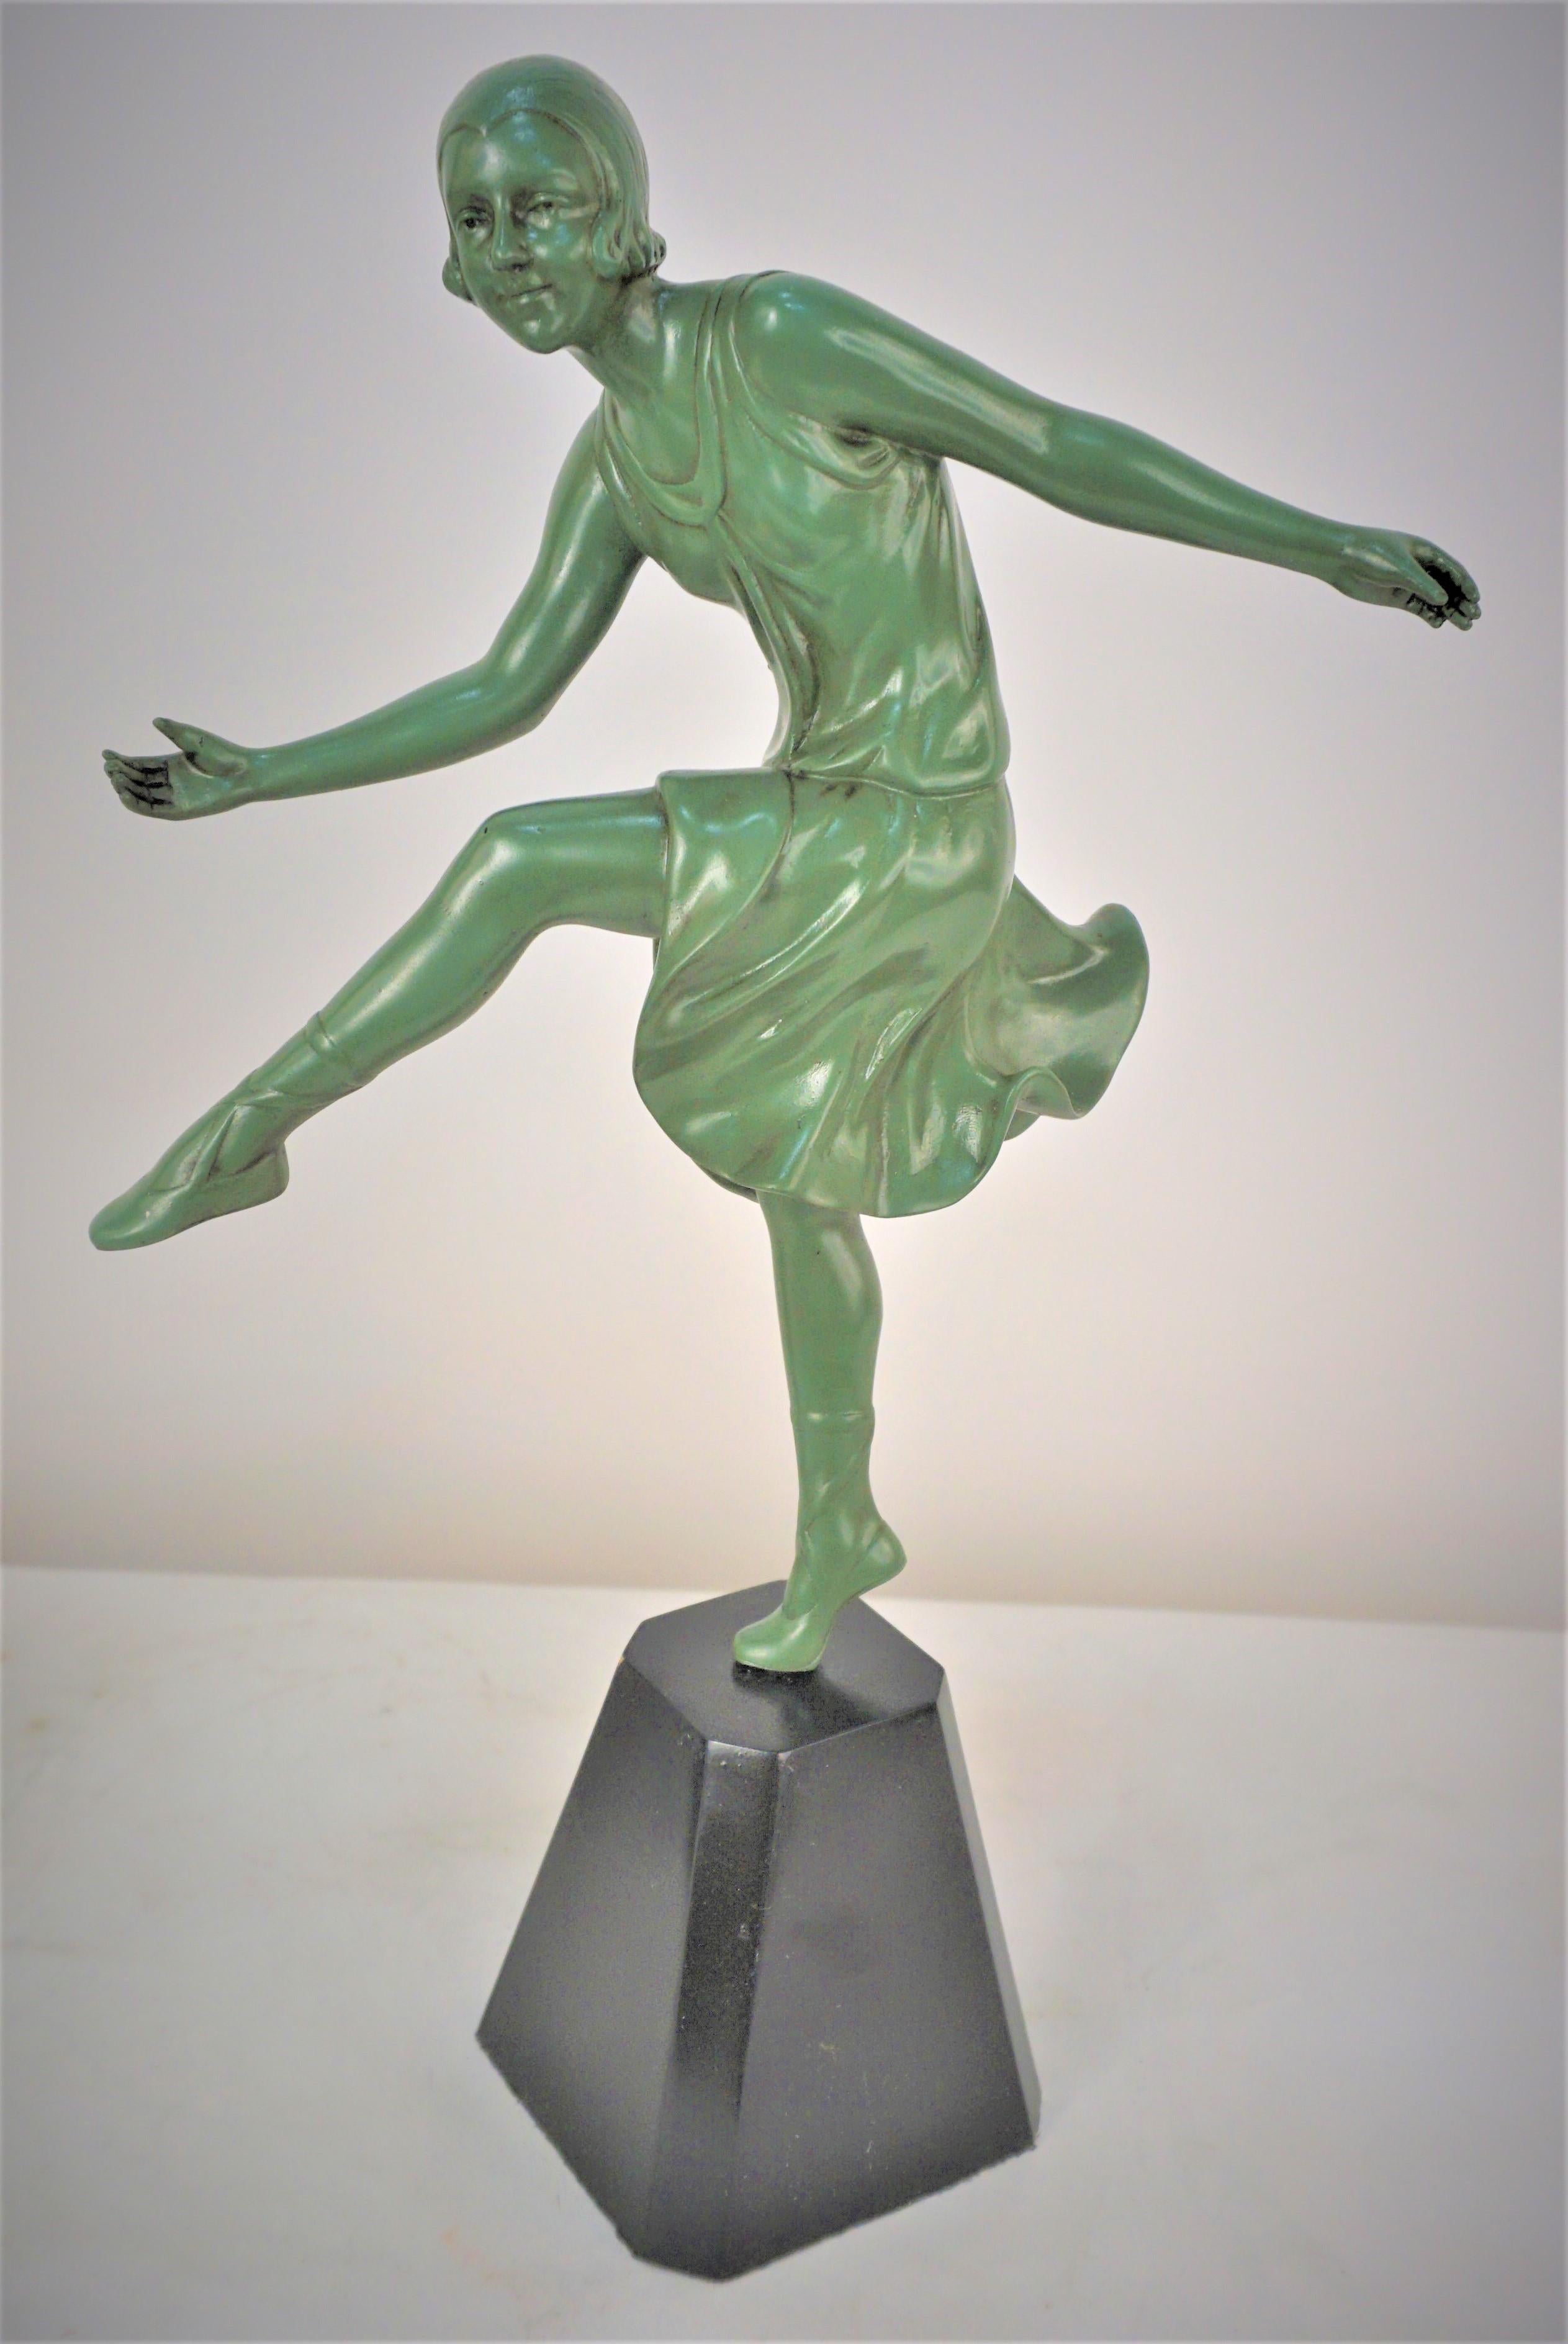 Pair of 1930's French art deco bronze sculptures of dancing girls finished in Verdi green and black lacquered.